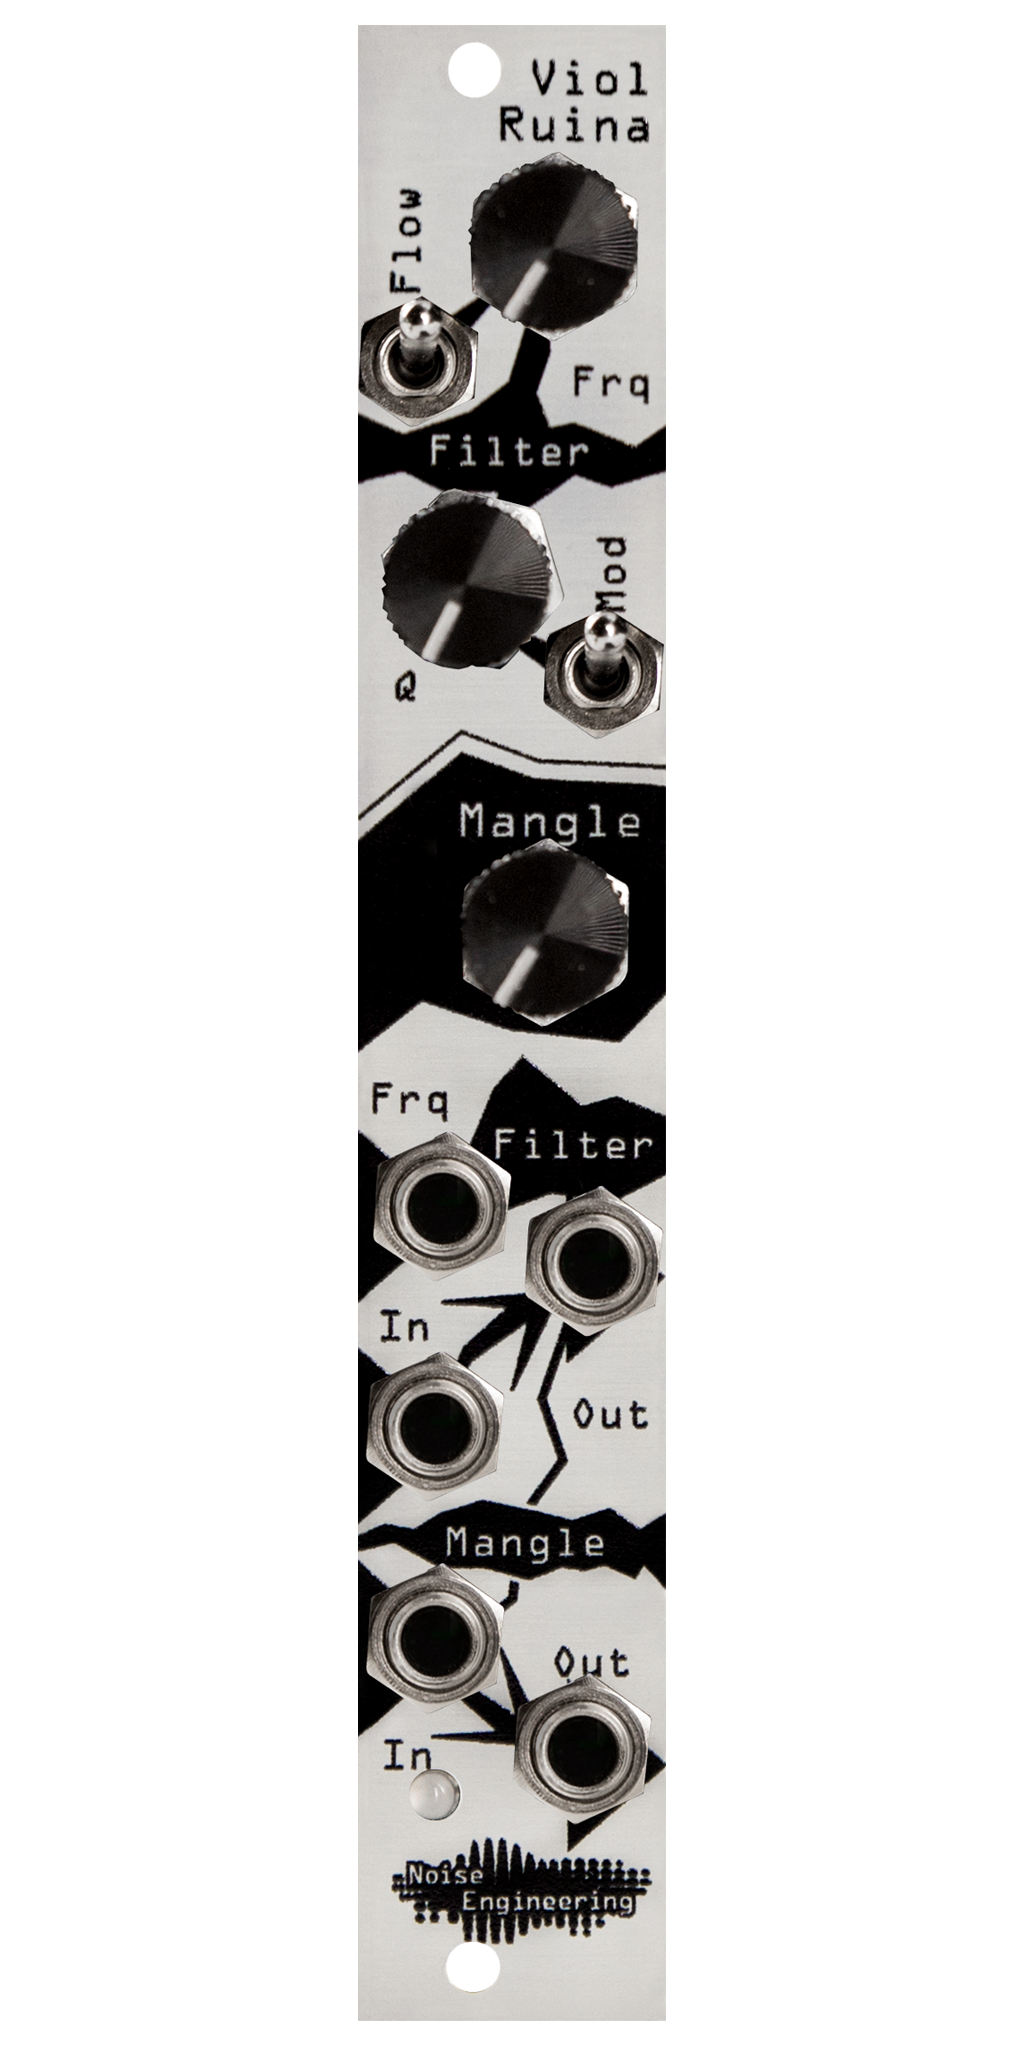 Eurorack analog 24dB resonant lowpass filter and distortion with internal modulation and envelope following in silver | Viol Ruina by Noise Engineering